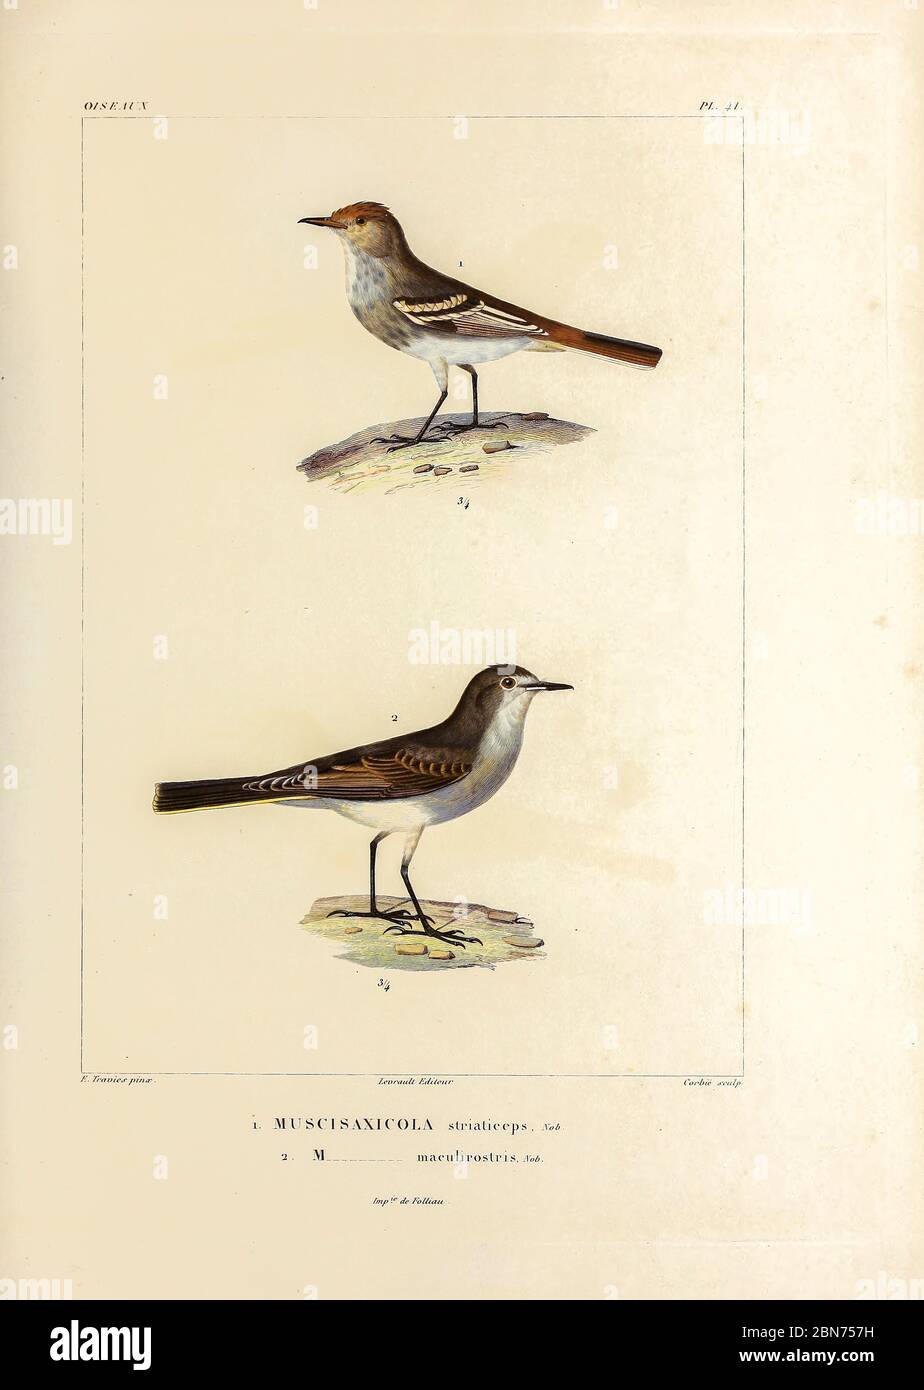 hand coloured sketch Top: cinereous tyrant (Knipolegus striaticeps [Here as Muscisaxicola striaticeps]) Bottom: spot-billed ground tyrant (Muscisaxicola maculirostris) From the book 'Voyage dans l'Amérique Méridionale' [Journey to South America: (Brazil, the eastern republic of Uruguay, the Argentine Republic, Patagonia, the republic of Chile, the republic of Bolivia, the republic of Peru), executed during the years 1826 - 1833] 4th volume Part 3 By: Orbigny, Alcide Dessalines d', d'Orbigny, 1802-1857; Montagne, Jean François Camille, 1784-1866; Martius, Karl Friedrich Philipp von, 1794-1868 Stock Photo